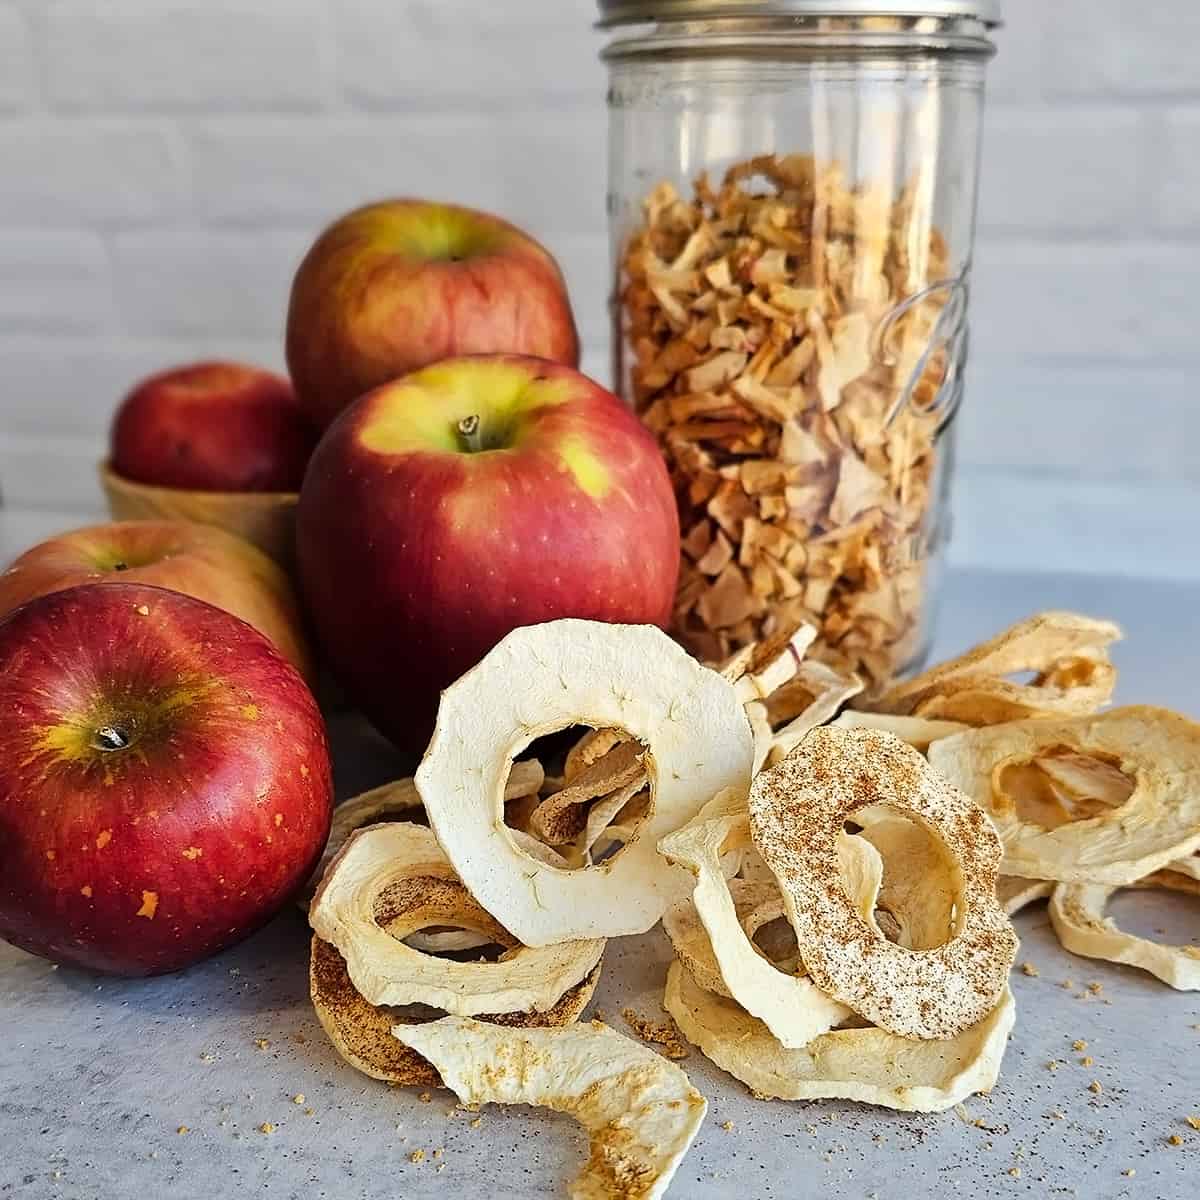 Dehydrate Apples and Make Apple Powder